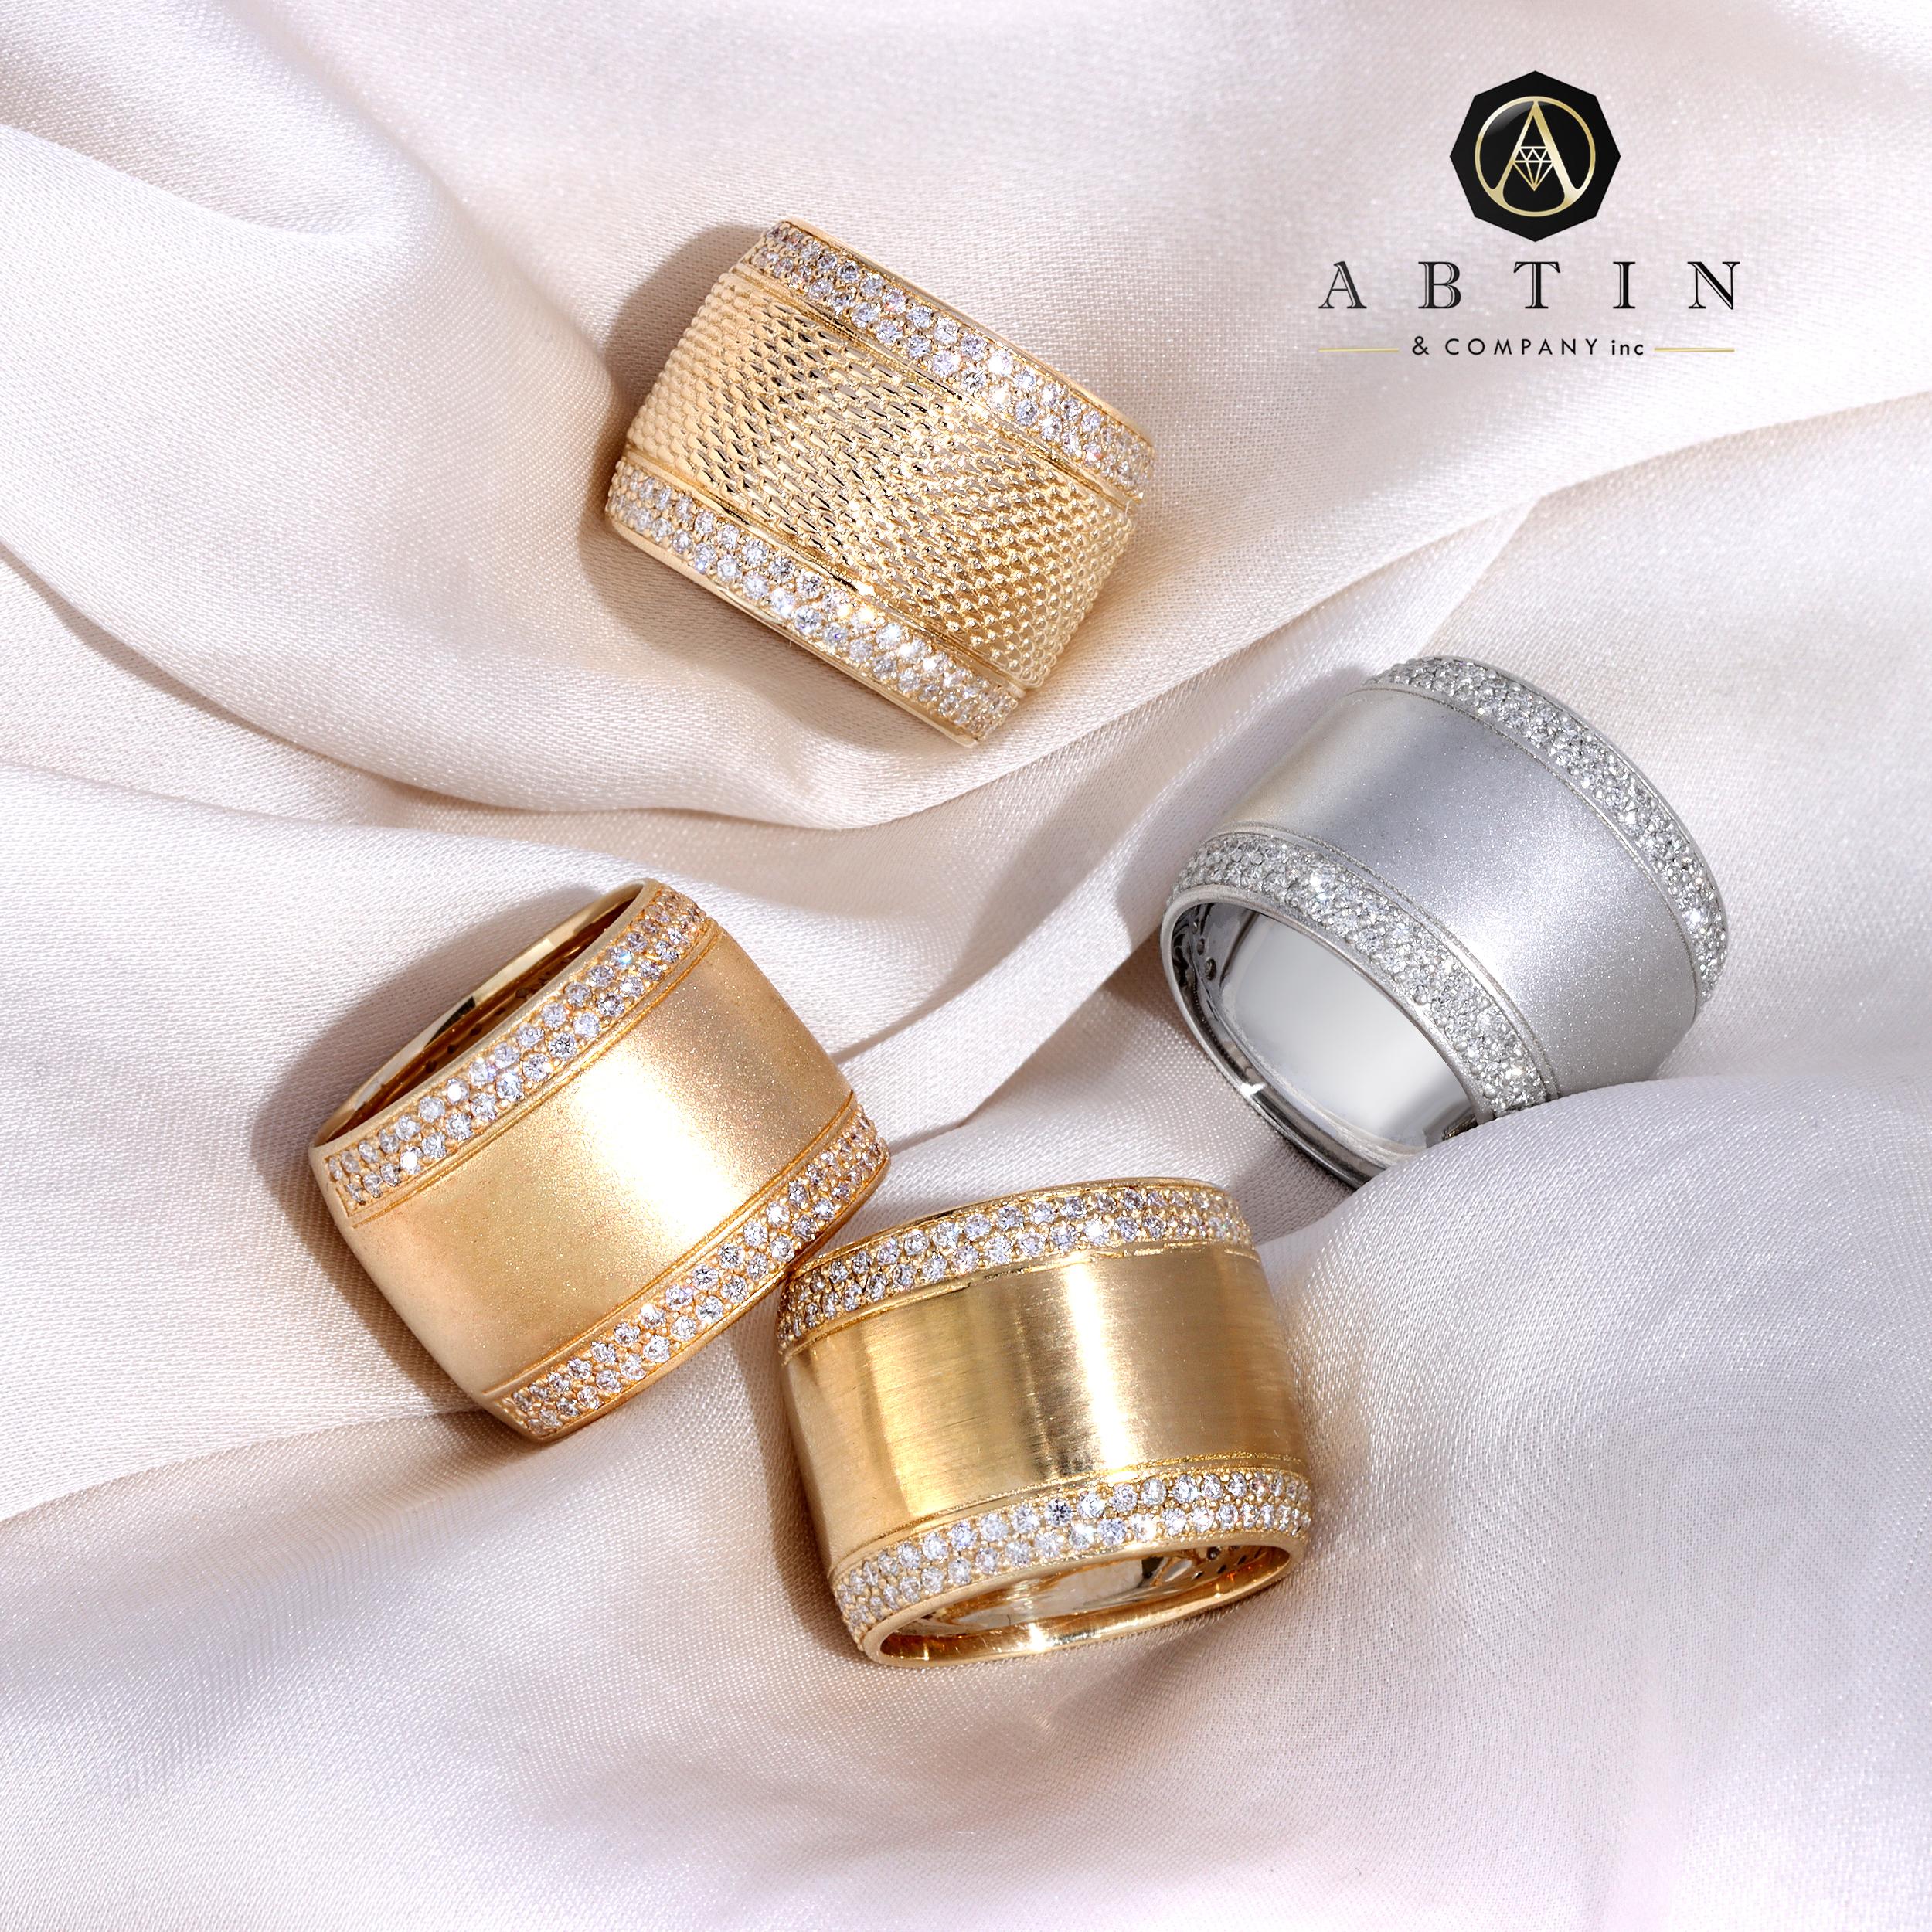 This captivating 14K gold cigar ring showcases two rows of exquisite diamond detailing along the band. A bold statement piece, it's ideal for daily wear and comes in yellow, white, and rose gold options.

Gold Weight: 7.70 gr.
Diamond Weight: 1.00